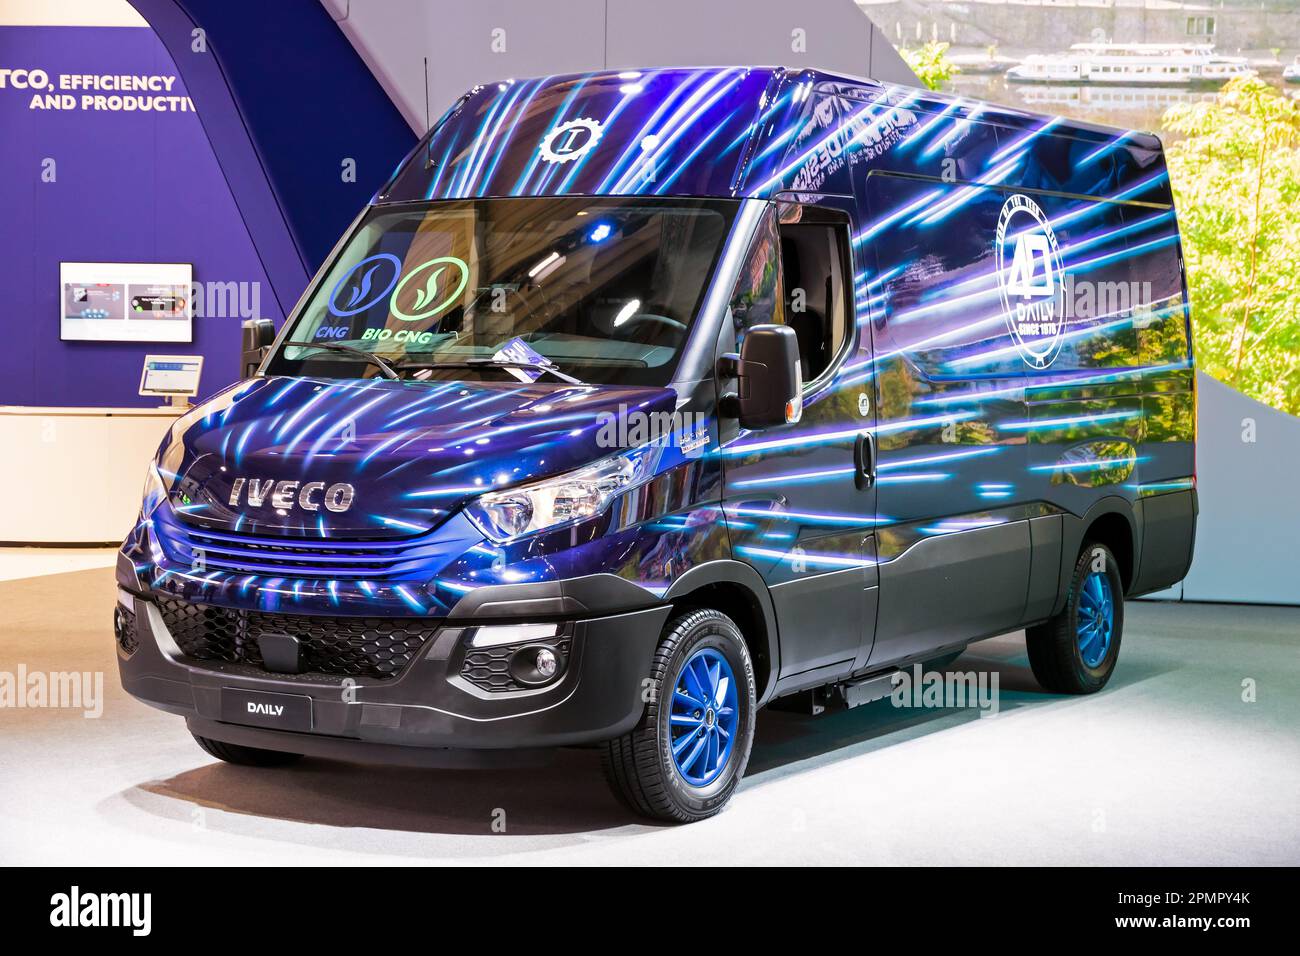 https://c8.alamy.com/comp/2PMPY4K/iveco-daily-35-np-van-at-the-hannover-iaa-transportation-motor-show-germany-september-27-2018-2PMPY4K.jpg